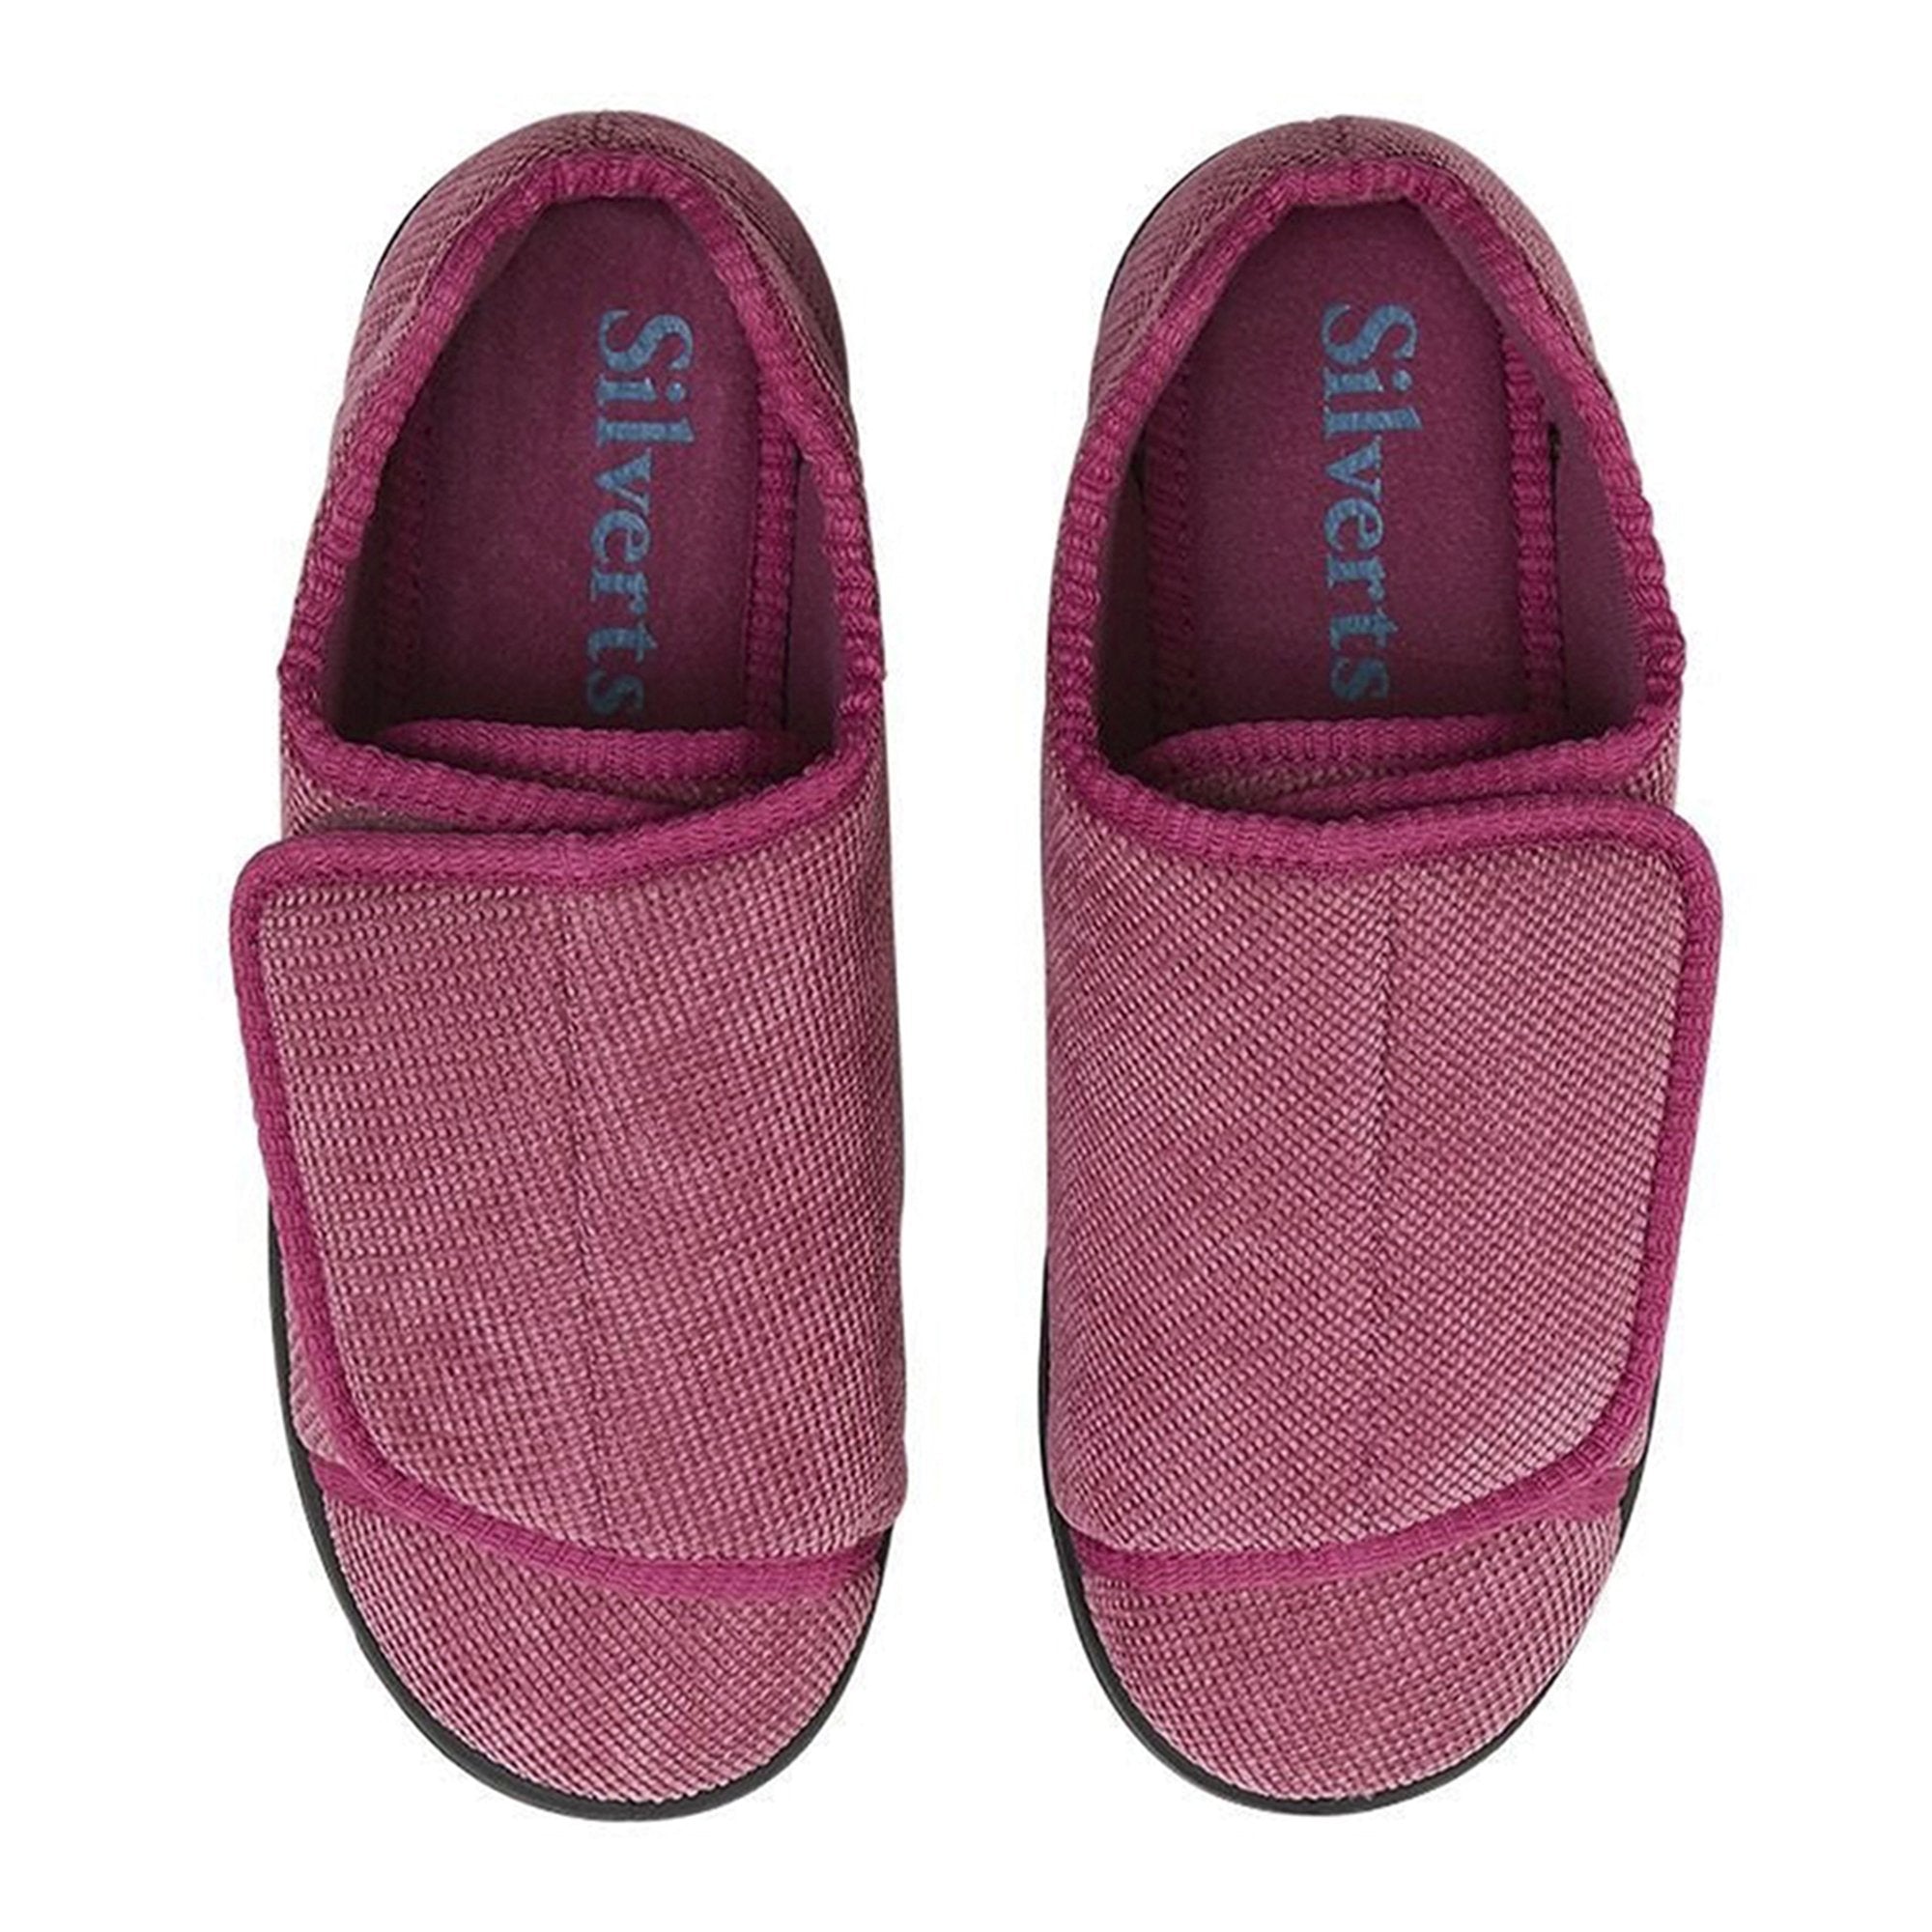 Slippers Silverts® Size 11 / 2X-Wide Dusty Rose Easy Closure